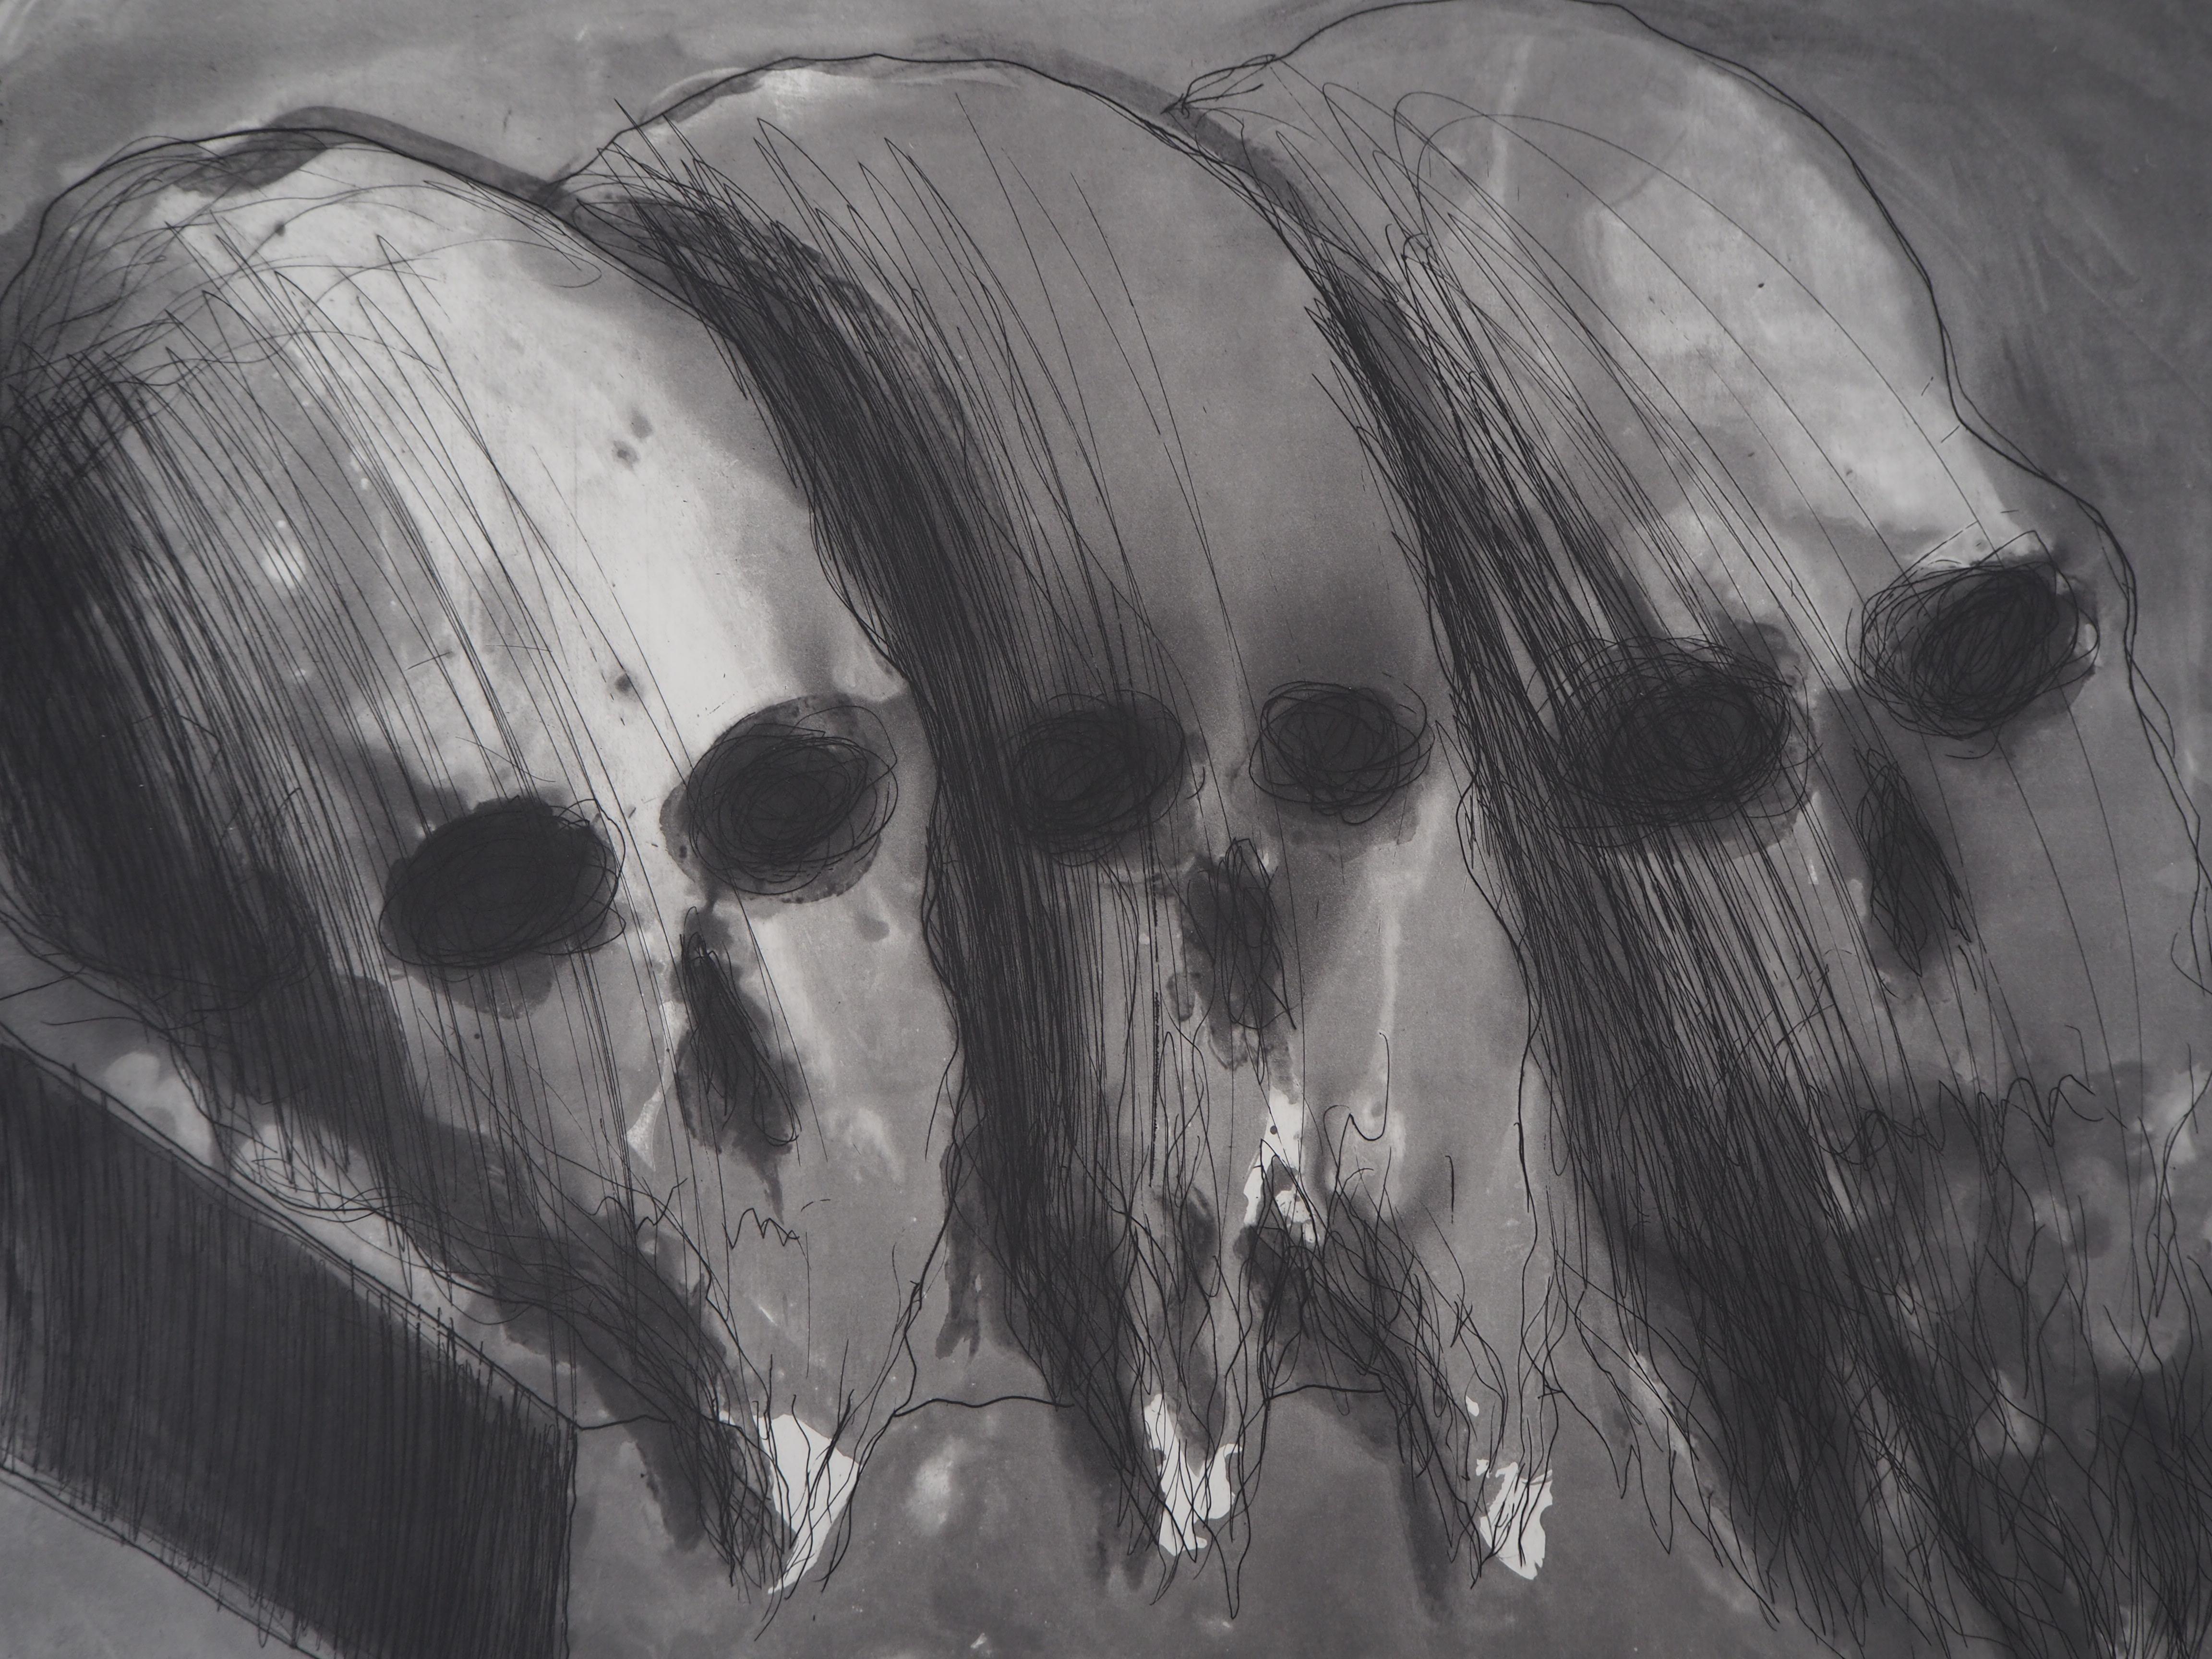 Vanity with Three Skulls - Original etching with aquatint - Modern Print by Miquel Barceló